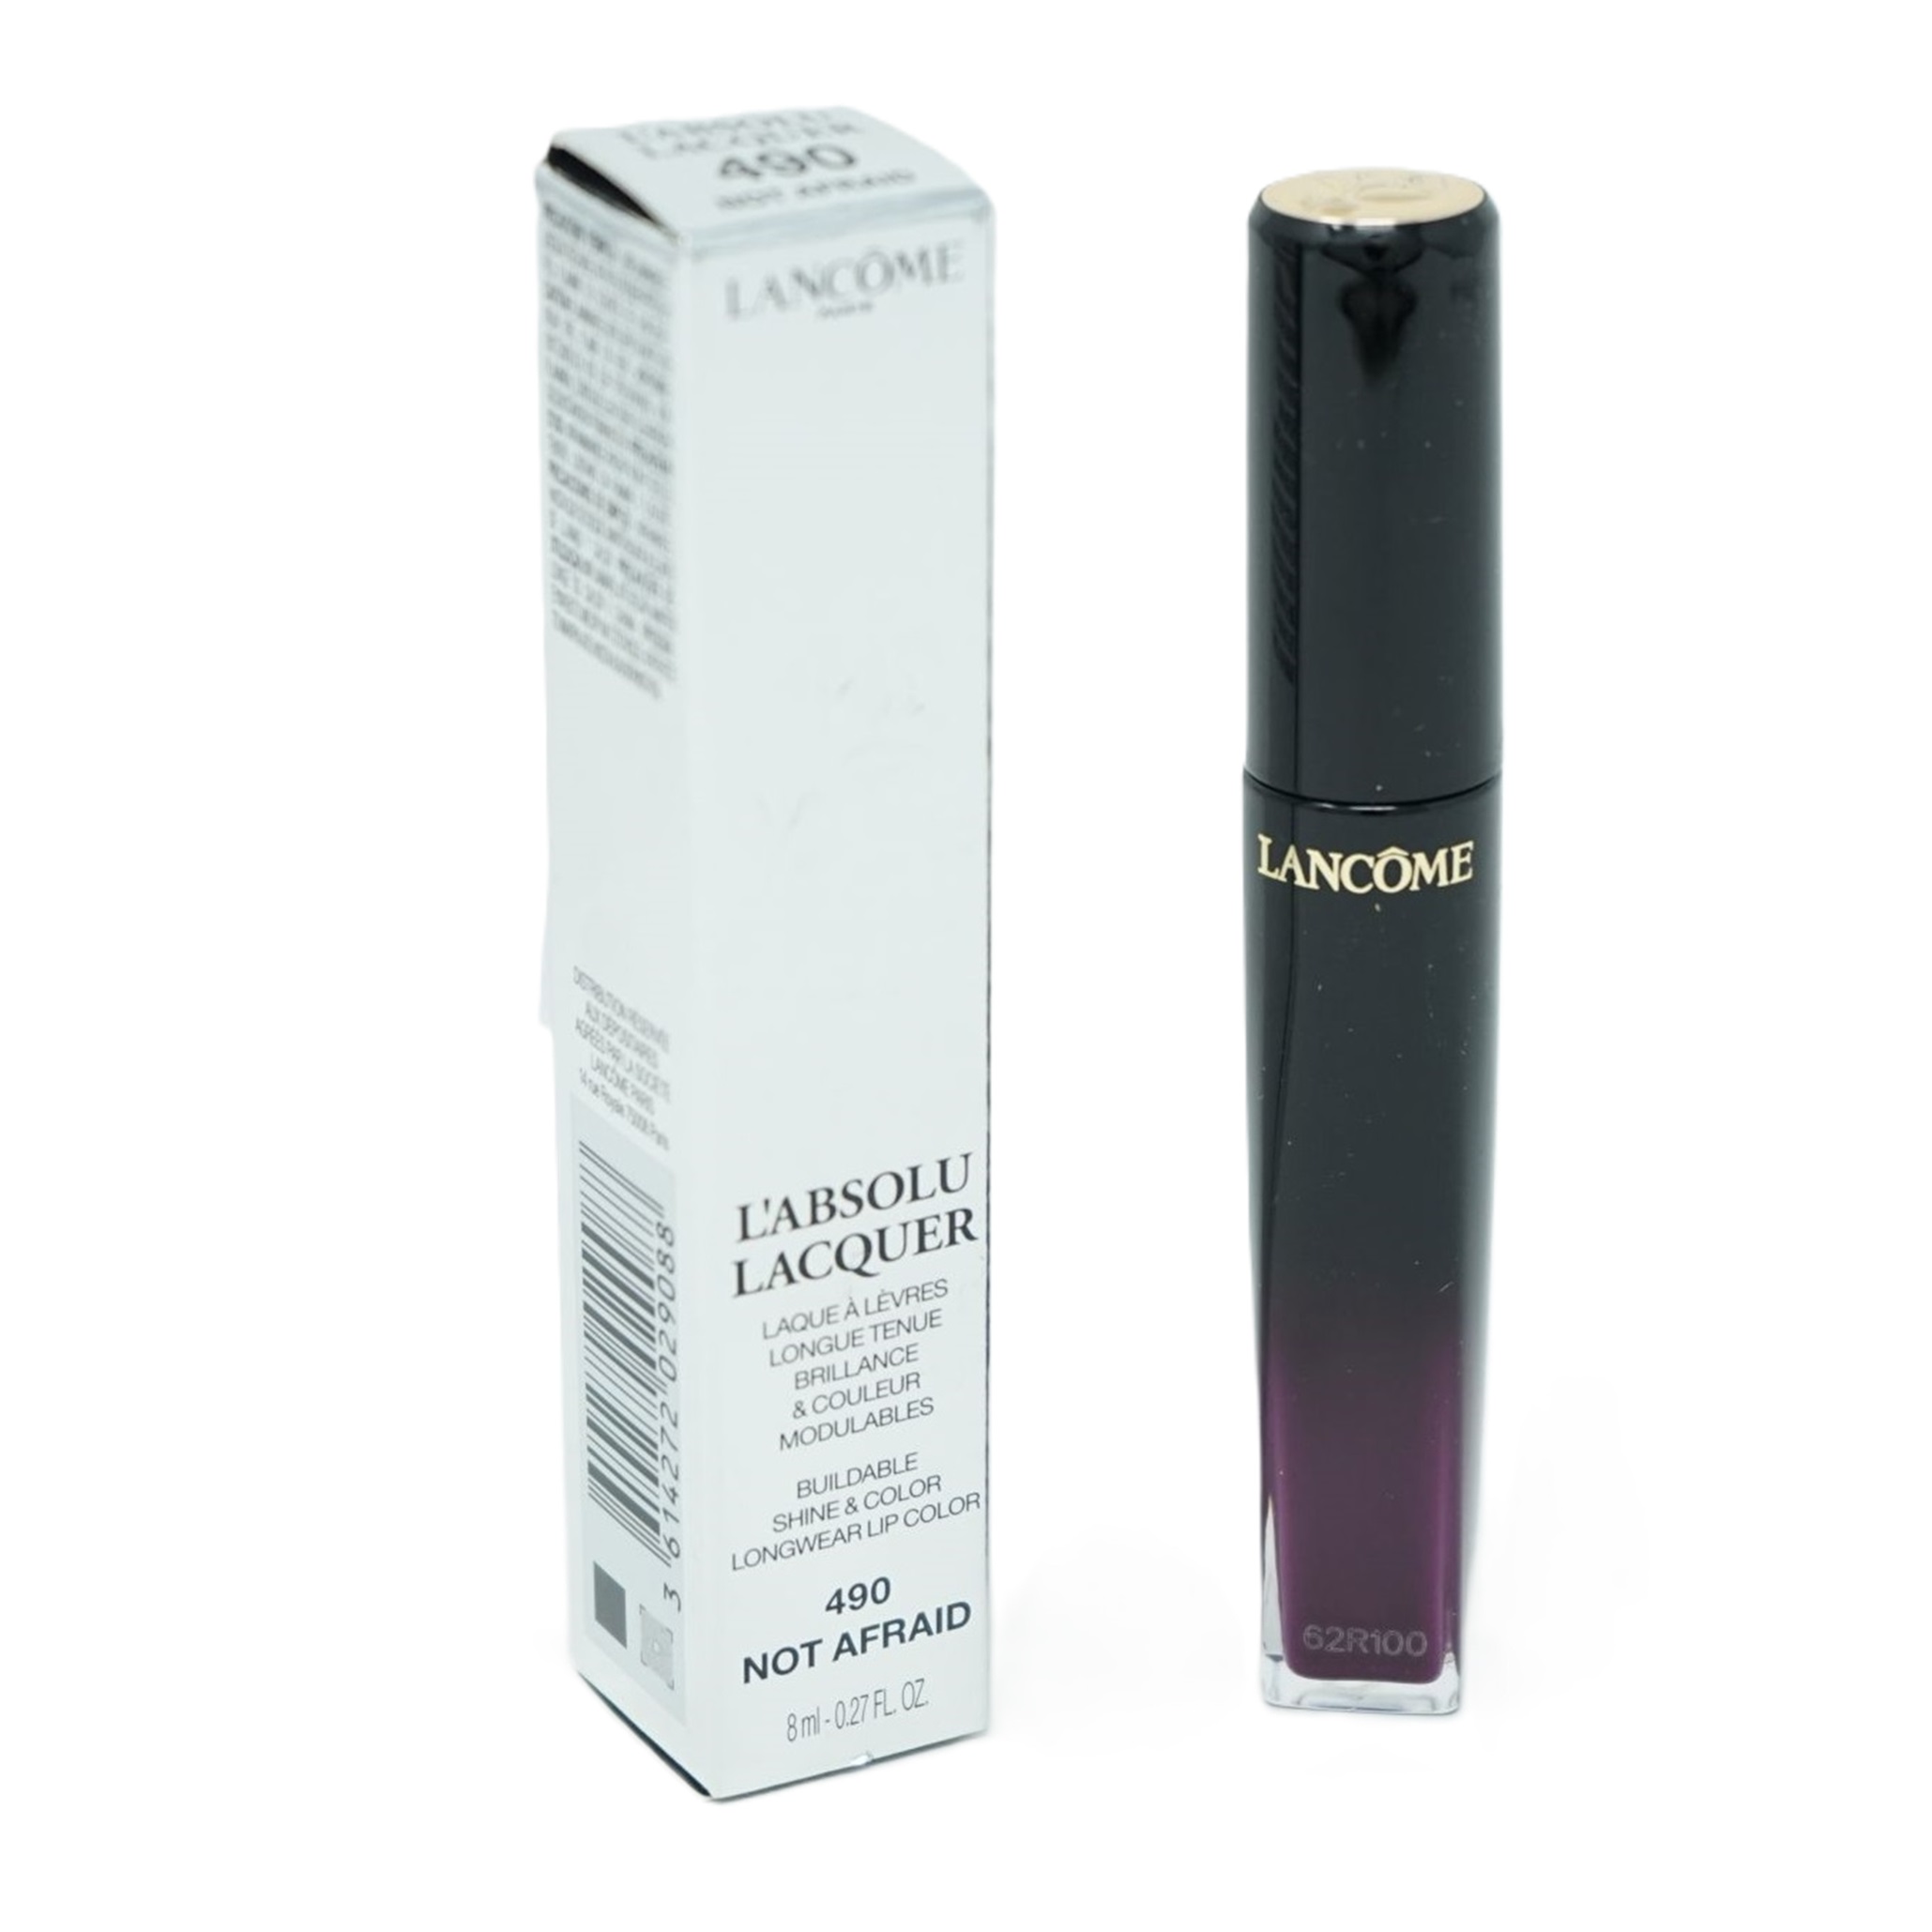 LANCOME L'Absolu Lacquer Lipgloss 490 Not Afraid